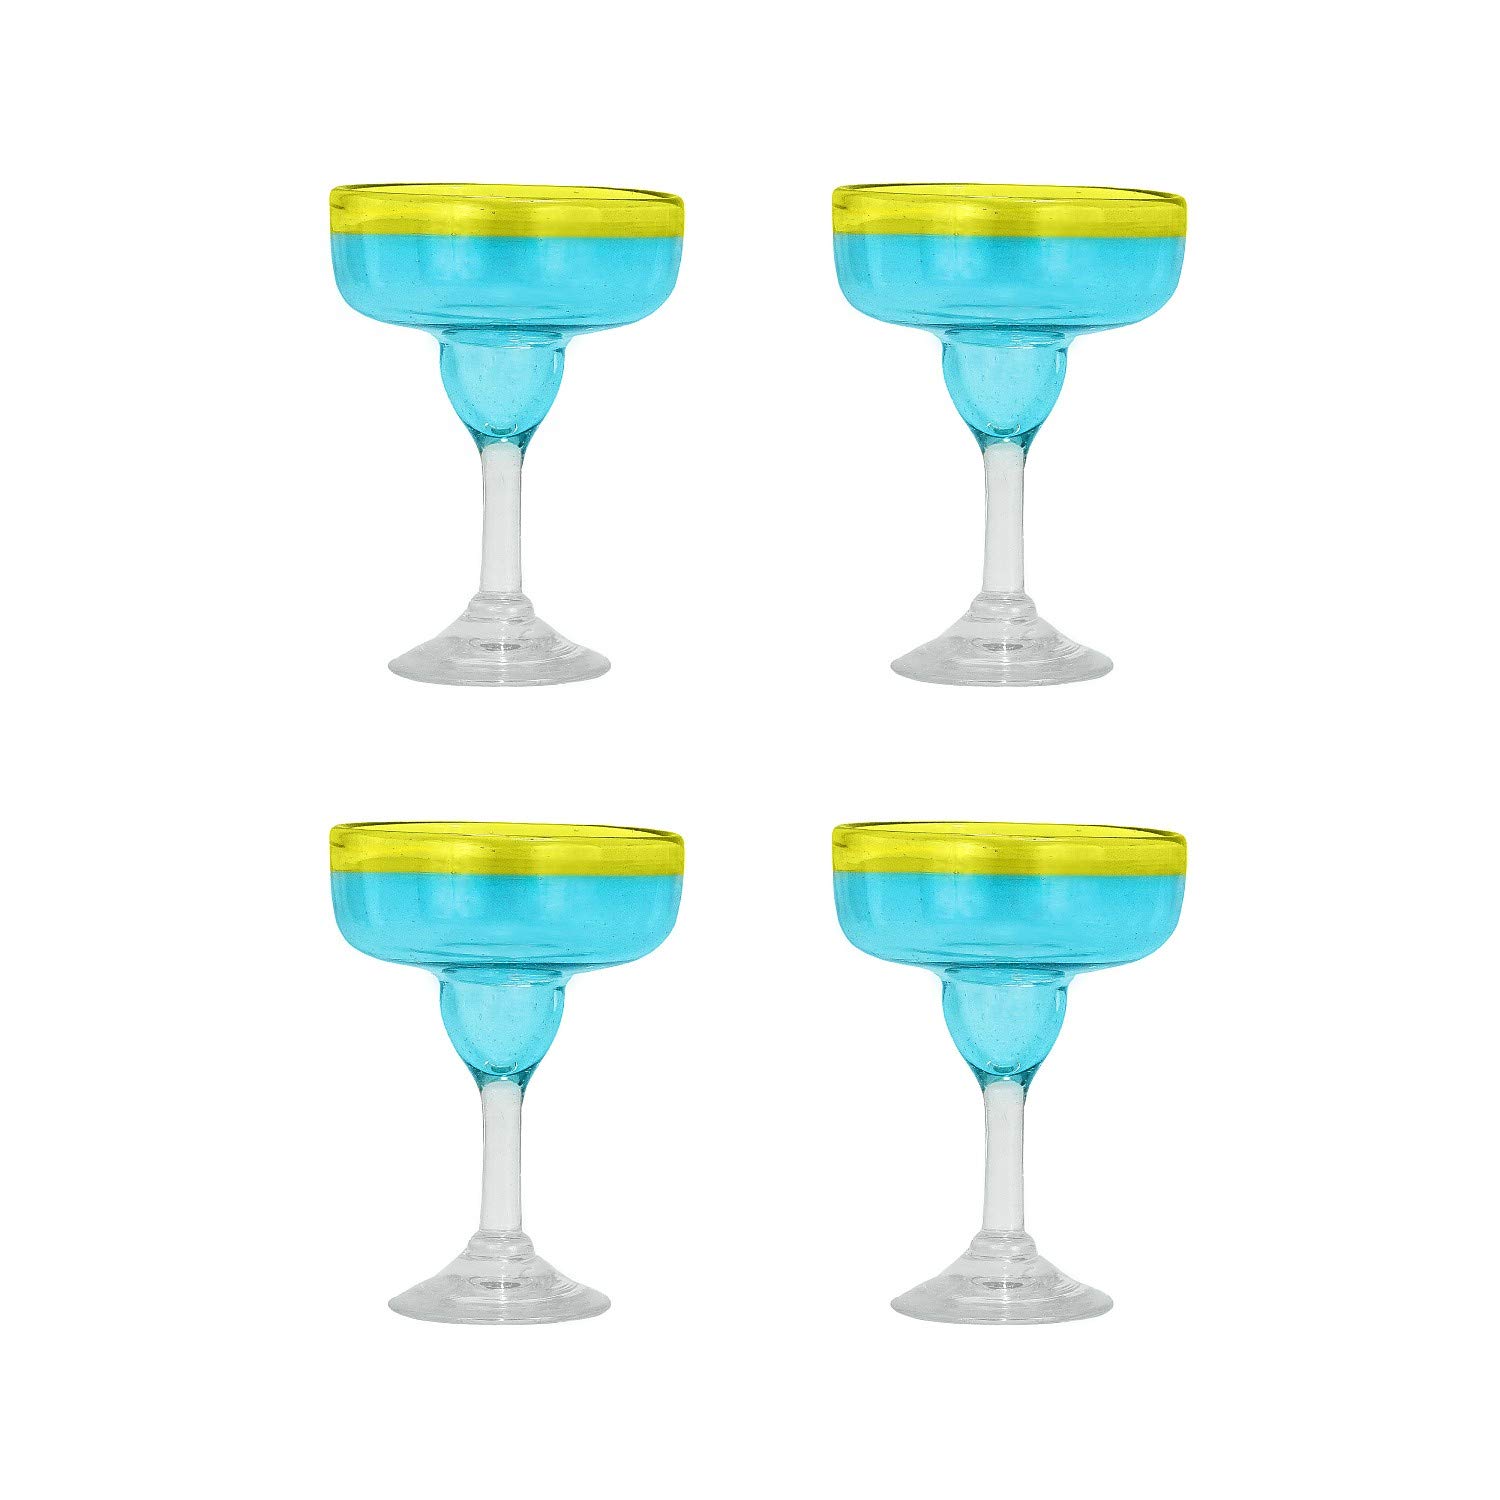 Amici Home Acapulco Collection, Authentic Mexican Handmade Margarita Glasses, Bar Glassware for Cocktails & Other Beverages, Blue Glass, Yellow Rimmed, made in Mexico 15-Ounces, Set of 4